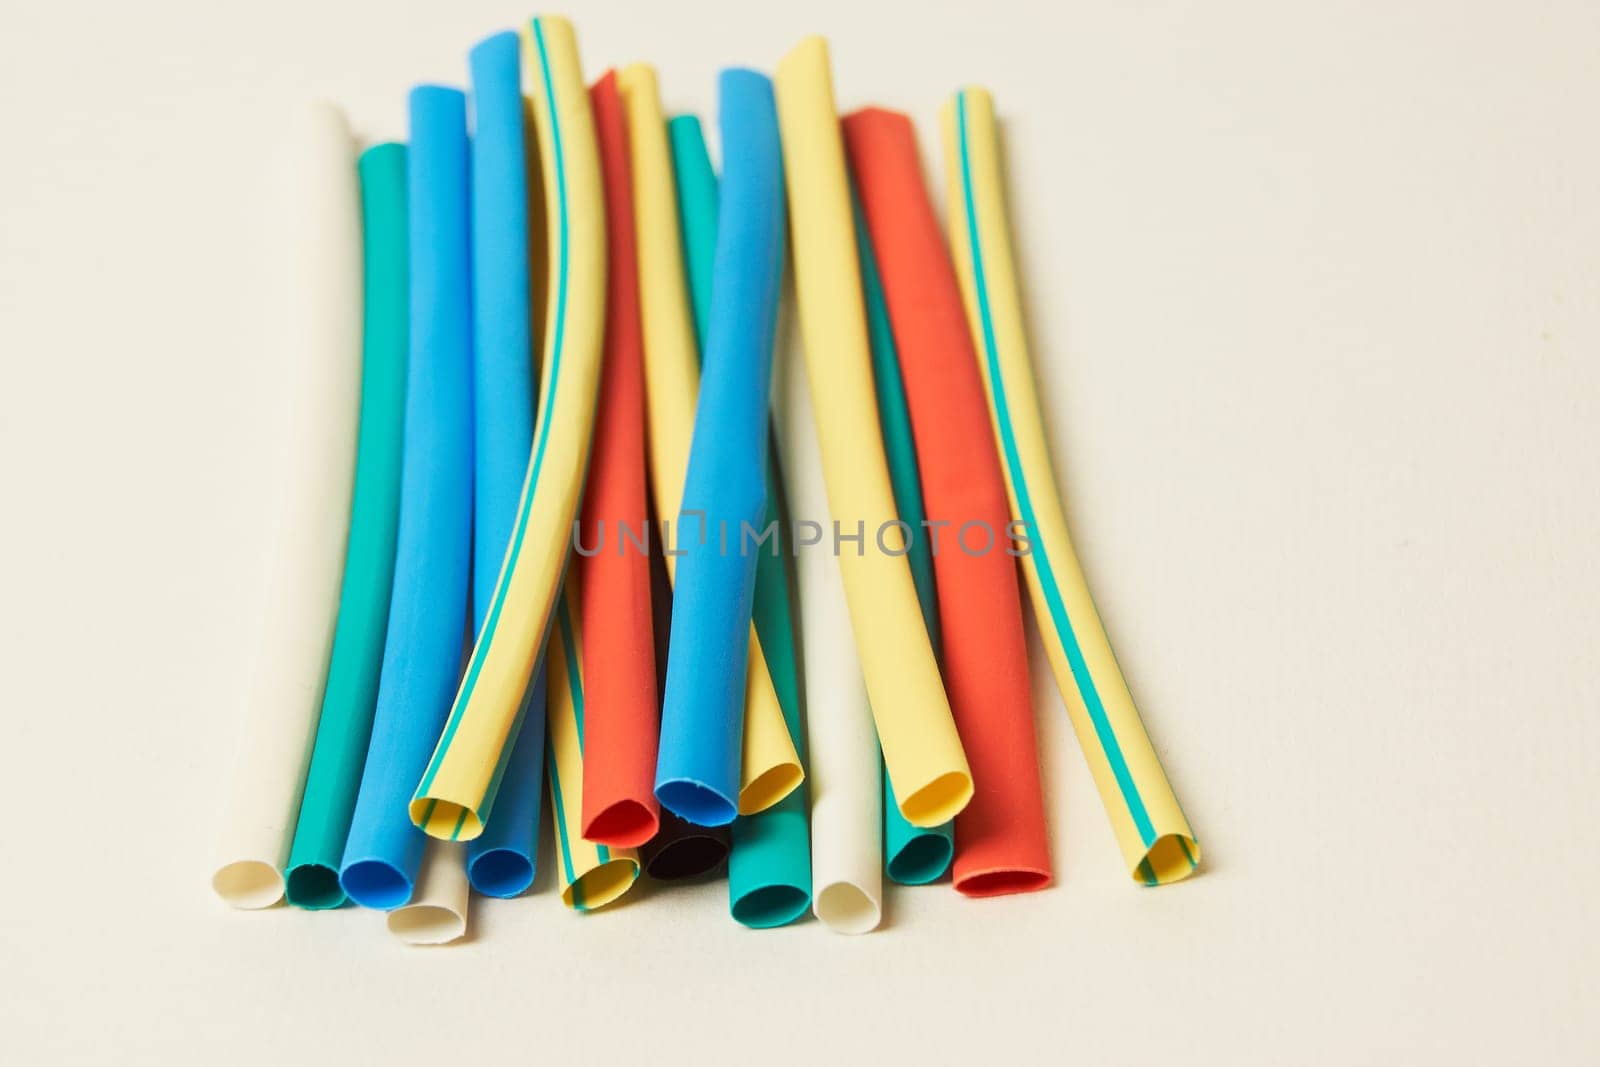 Multicolored shrink tube on a white background tubes of different colors